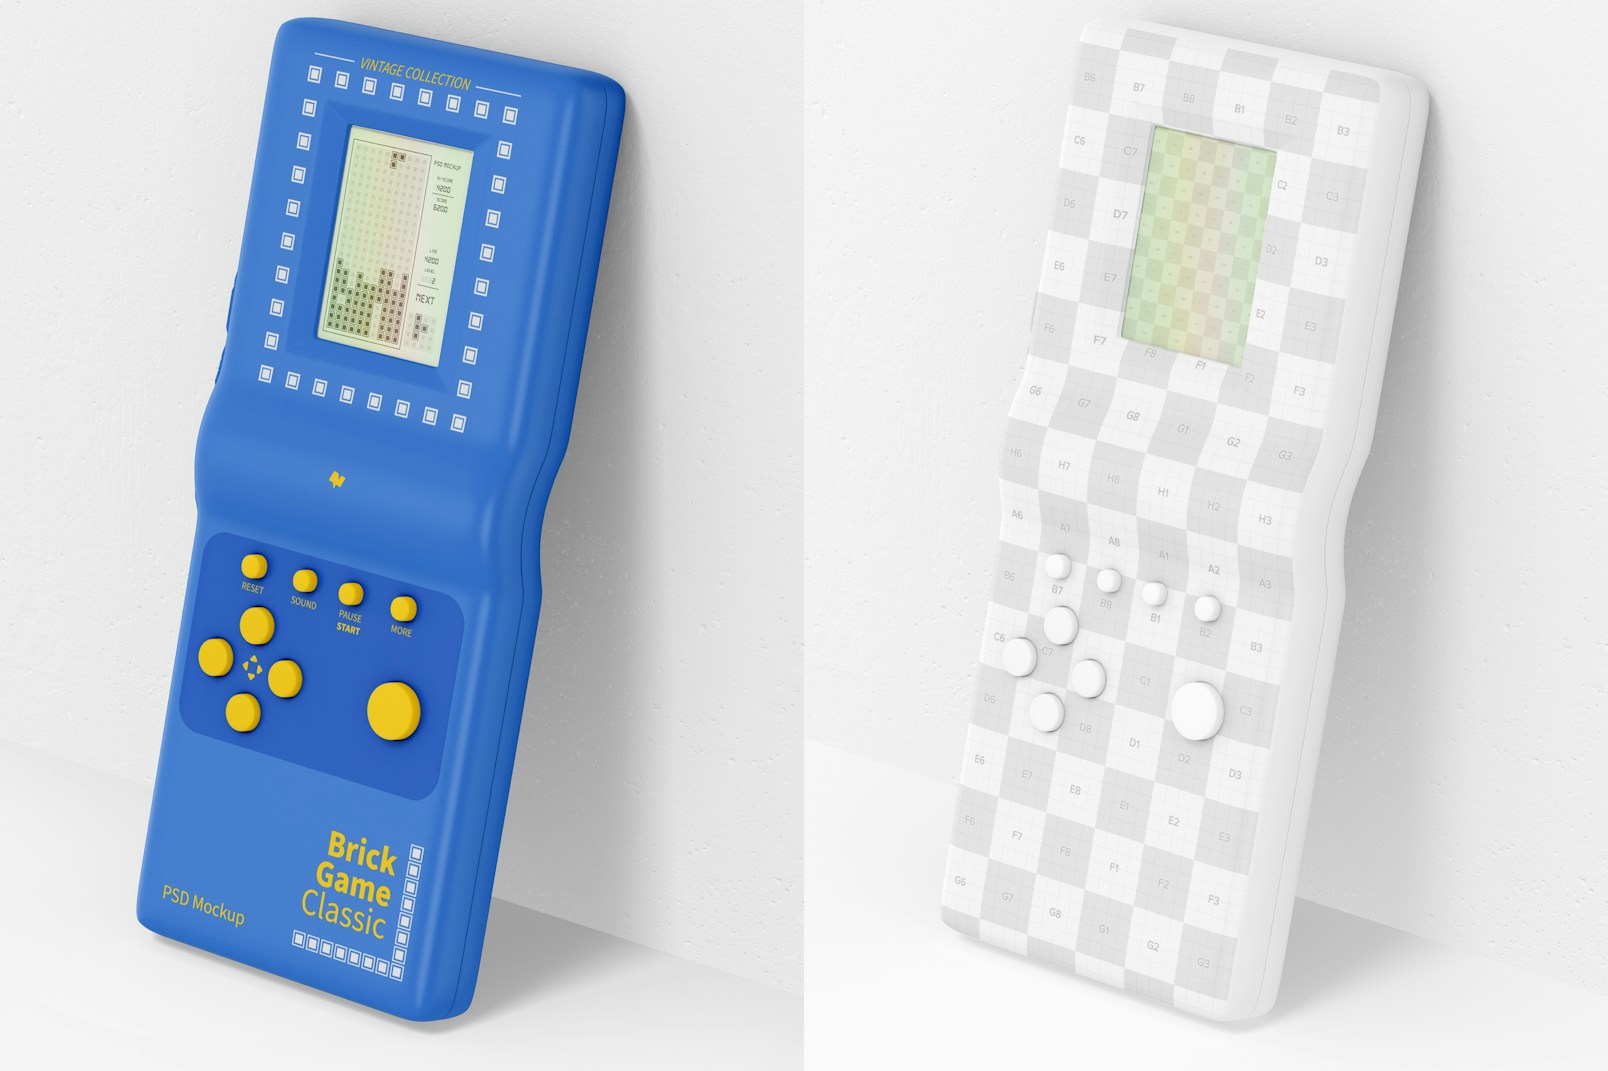 Brick Game Classic Console Mockup, Leaned